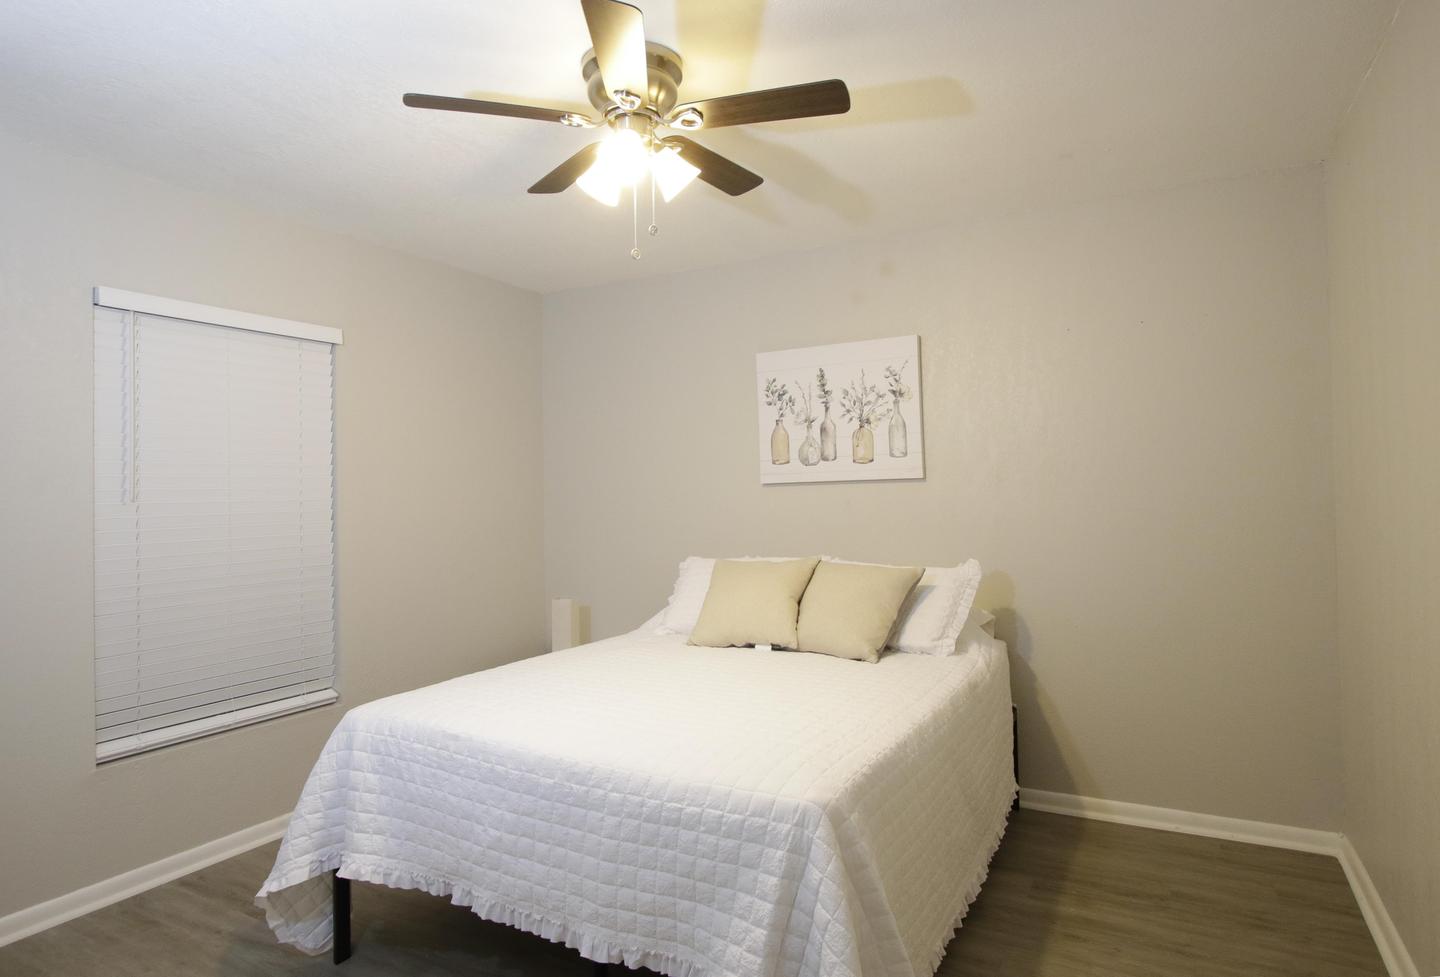 Bedroom 7 with queen bed, large walk-in closet, ceiling fan, walk-in closet, nightstand, wall art and lamp.